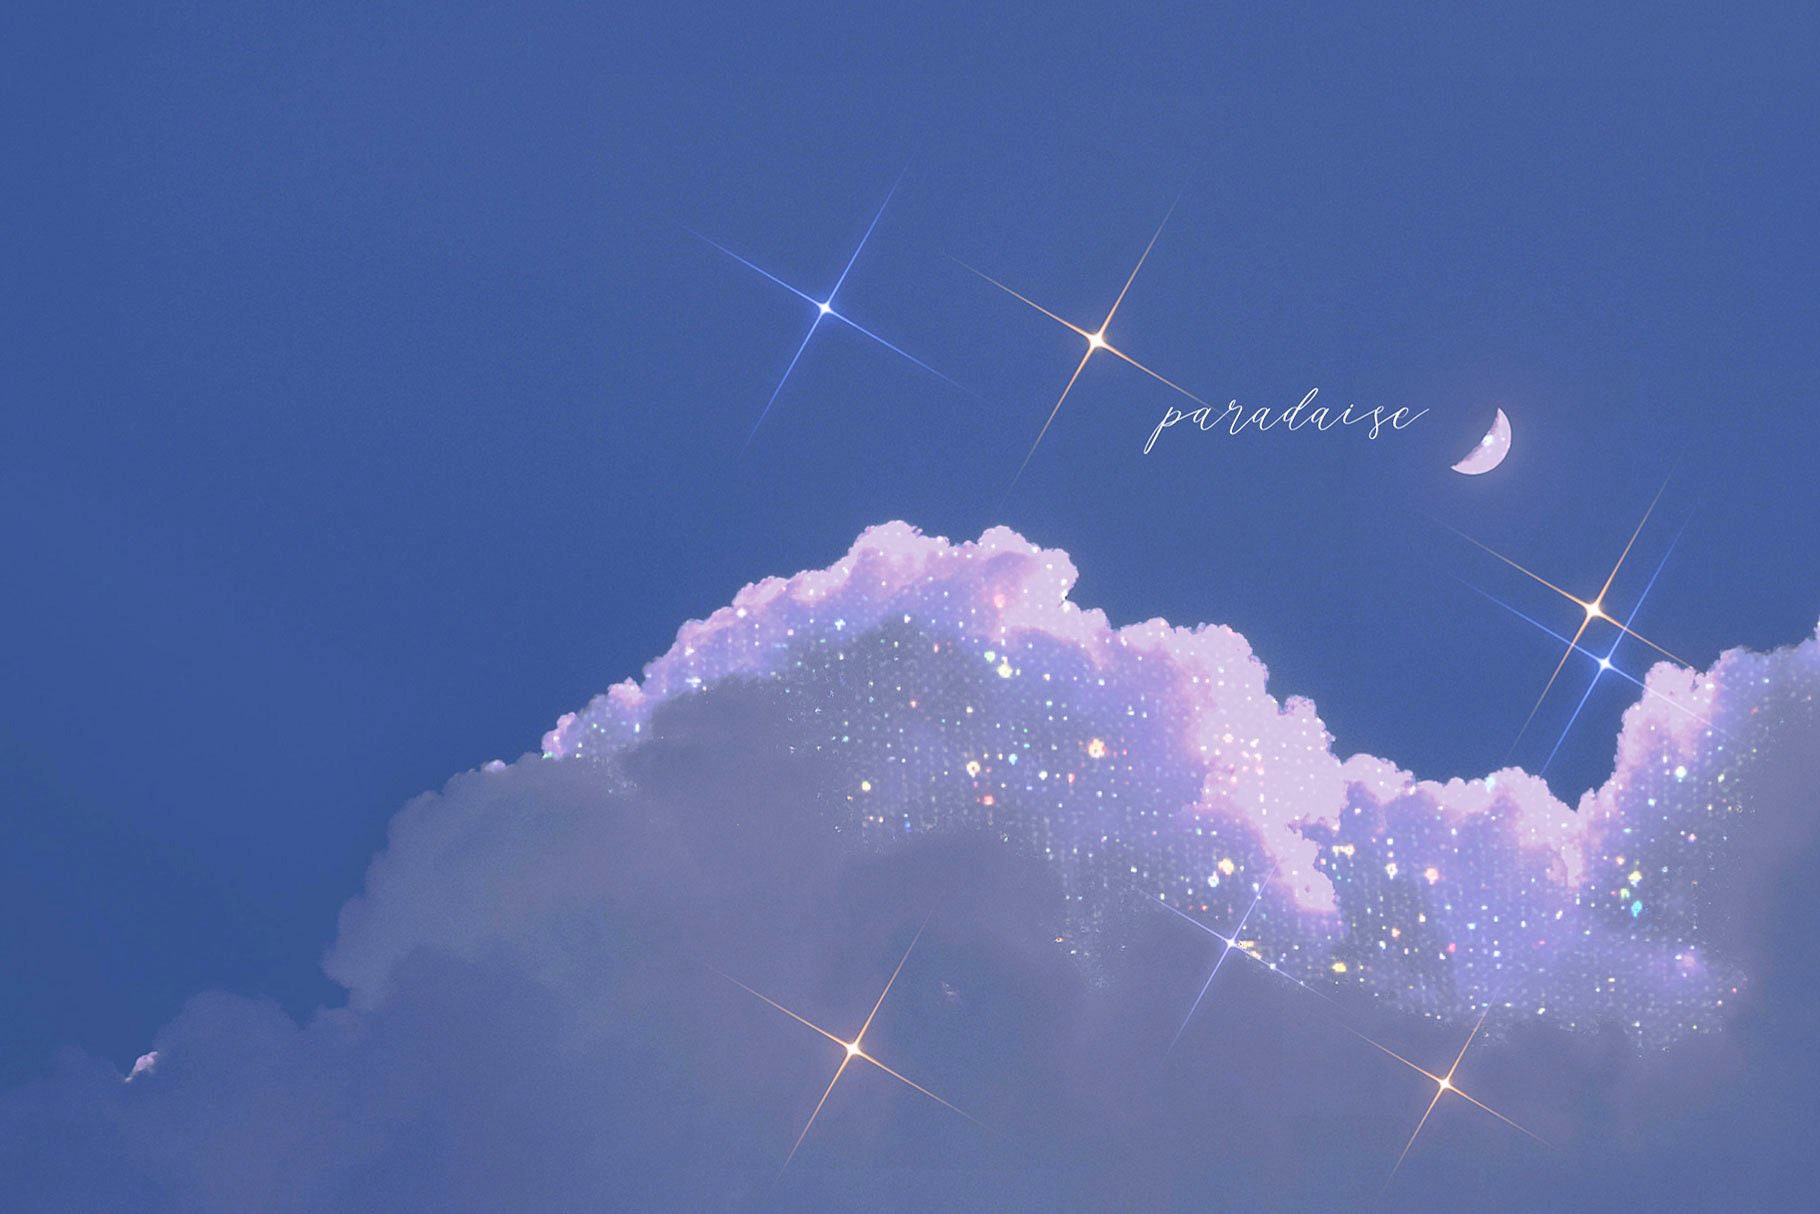 Aesthetic wallpaper of a cloudy sky with stars and the moon - Sky